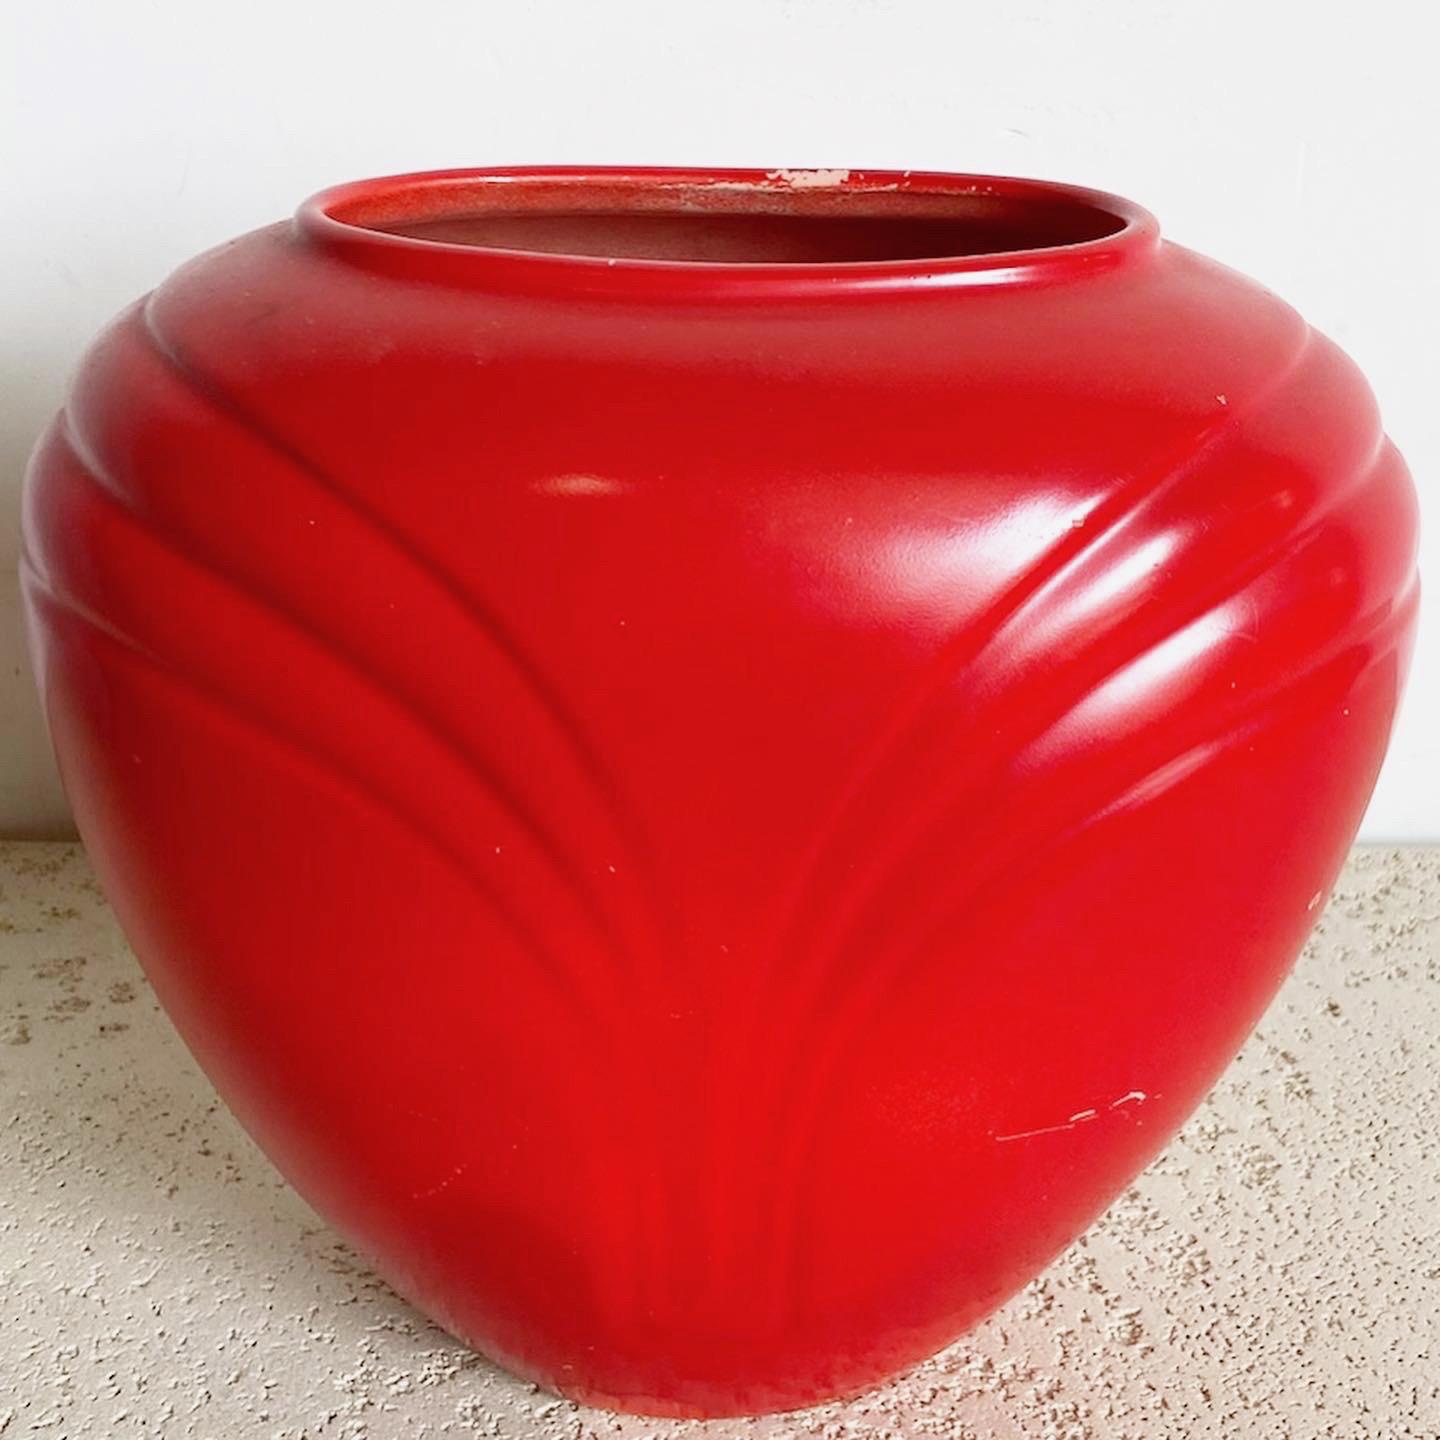 The Haeger Red Postmodern Vase is a stunning piece that effortlessly blends art and function, capturing the essence of postmodern design with its vibrant red hue and unconventional form.
Was likely repainted red.